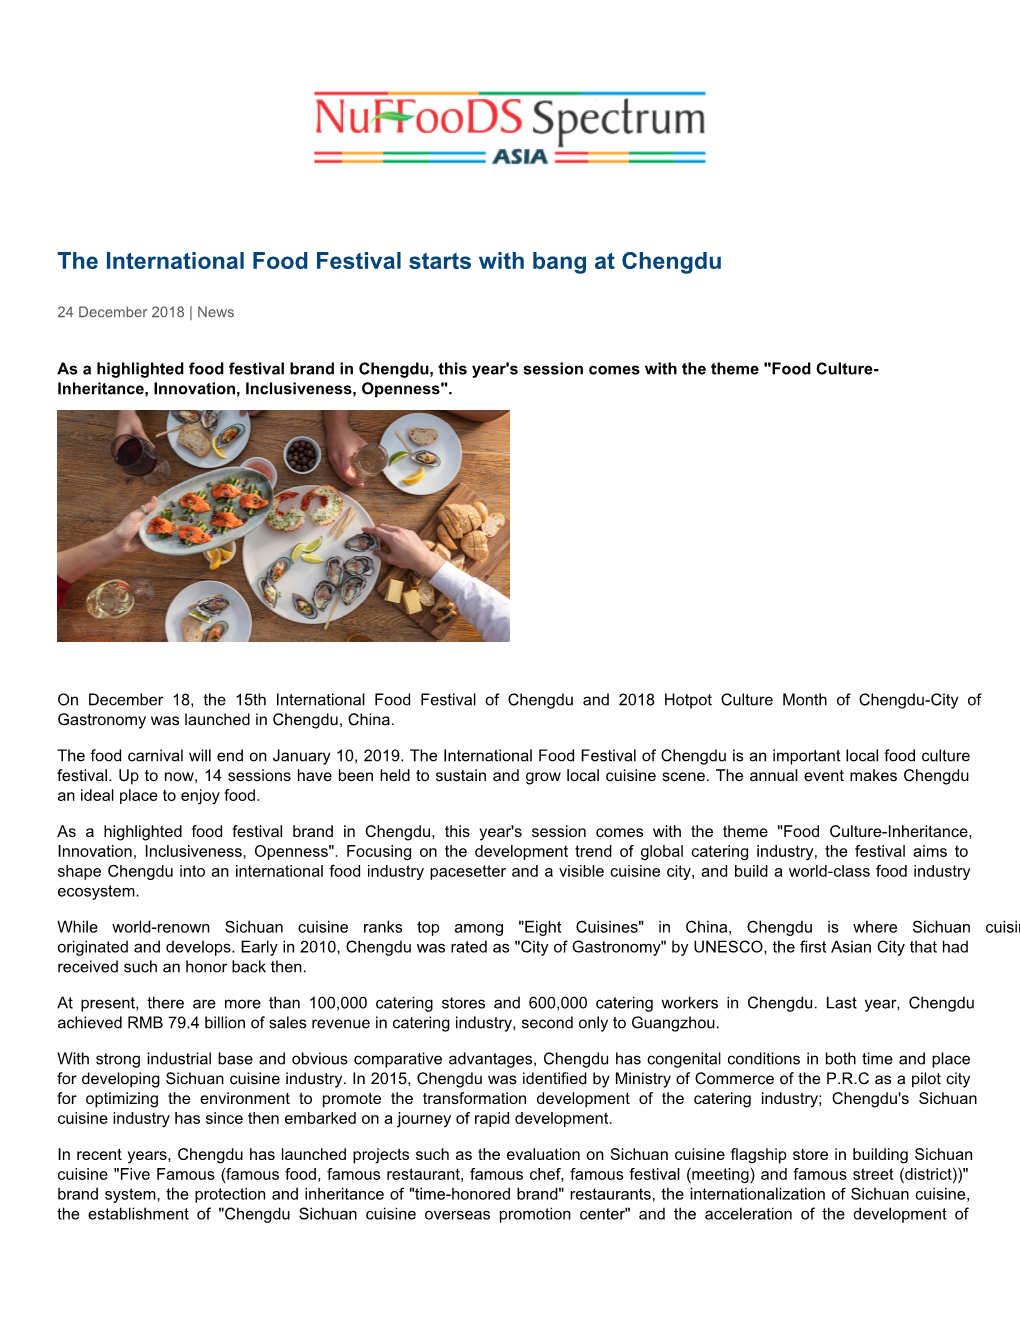 The International Food Festival Starts with Bang at Chengdu